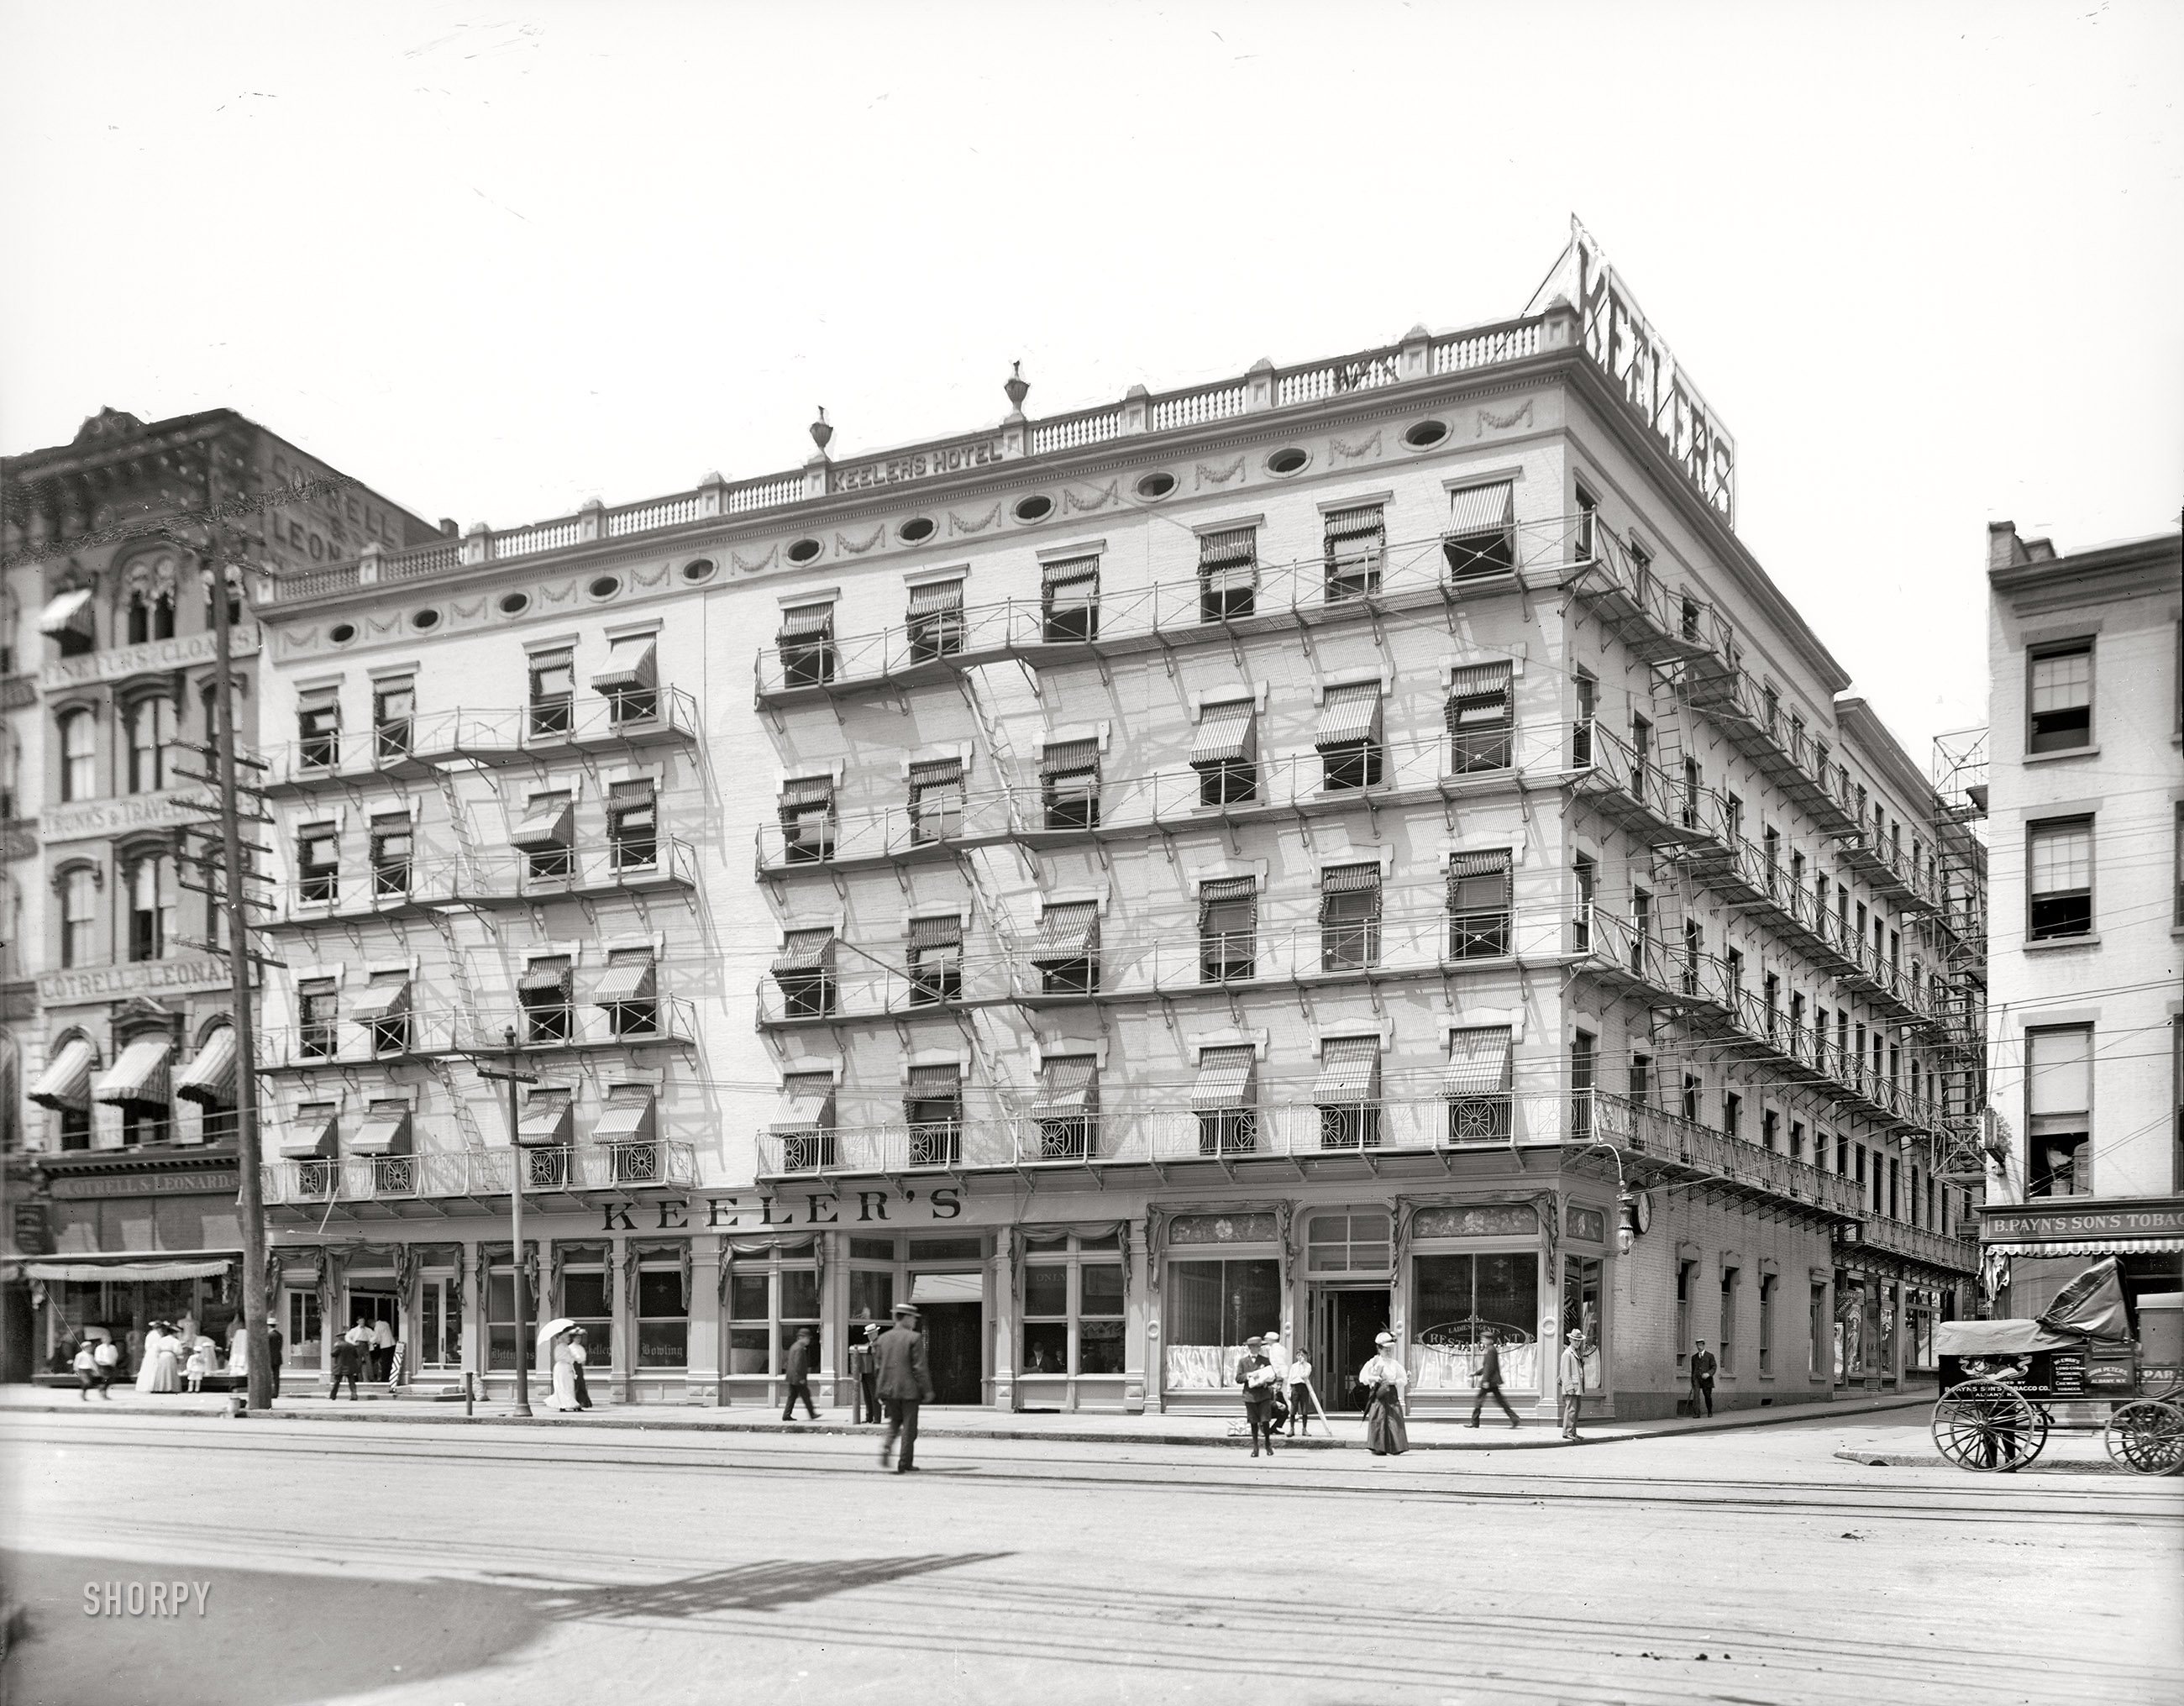 1908. "Keeler's Hotel, Albany, N.Y." The fire-escape-festooned establishment last glimpsed here. 8x10 inch dry plate glass negative, Detroit Publishing Company. View full size.